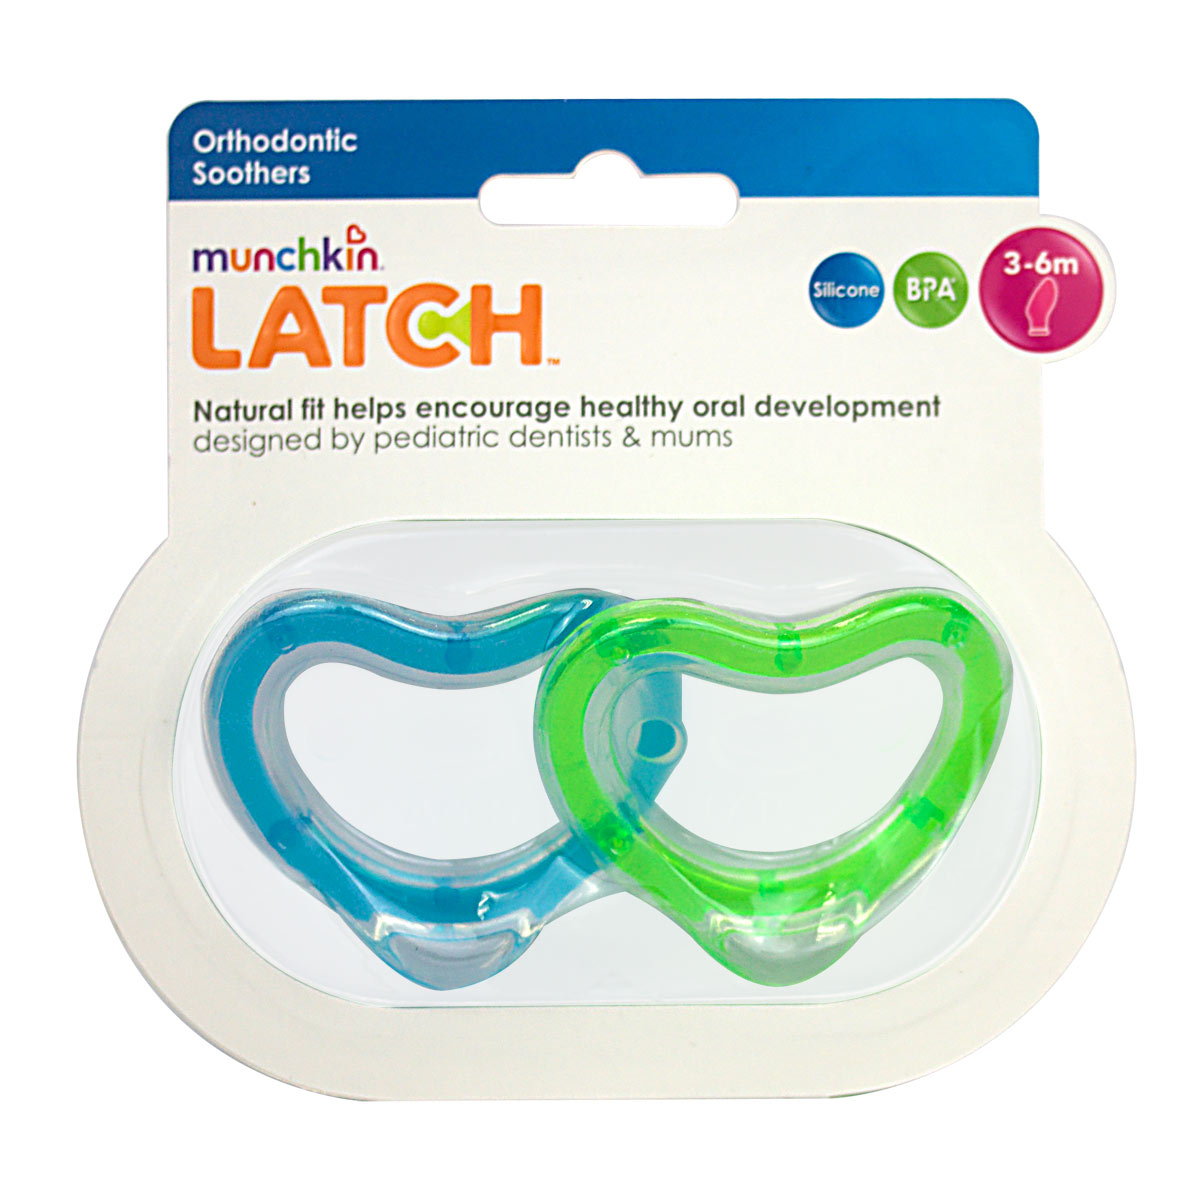 Munchkin 2PK Latch Soother 3-6m